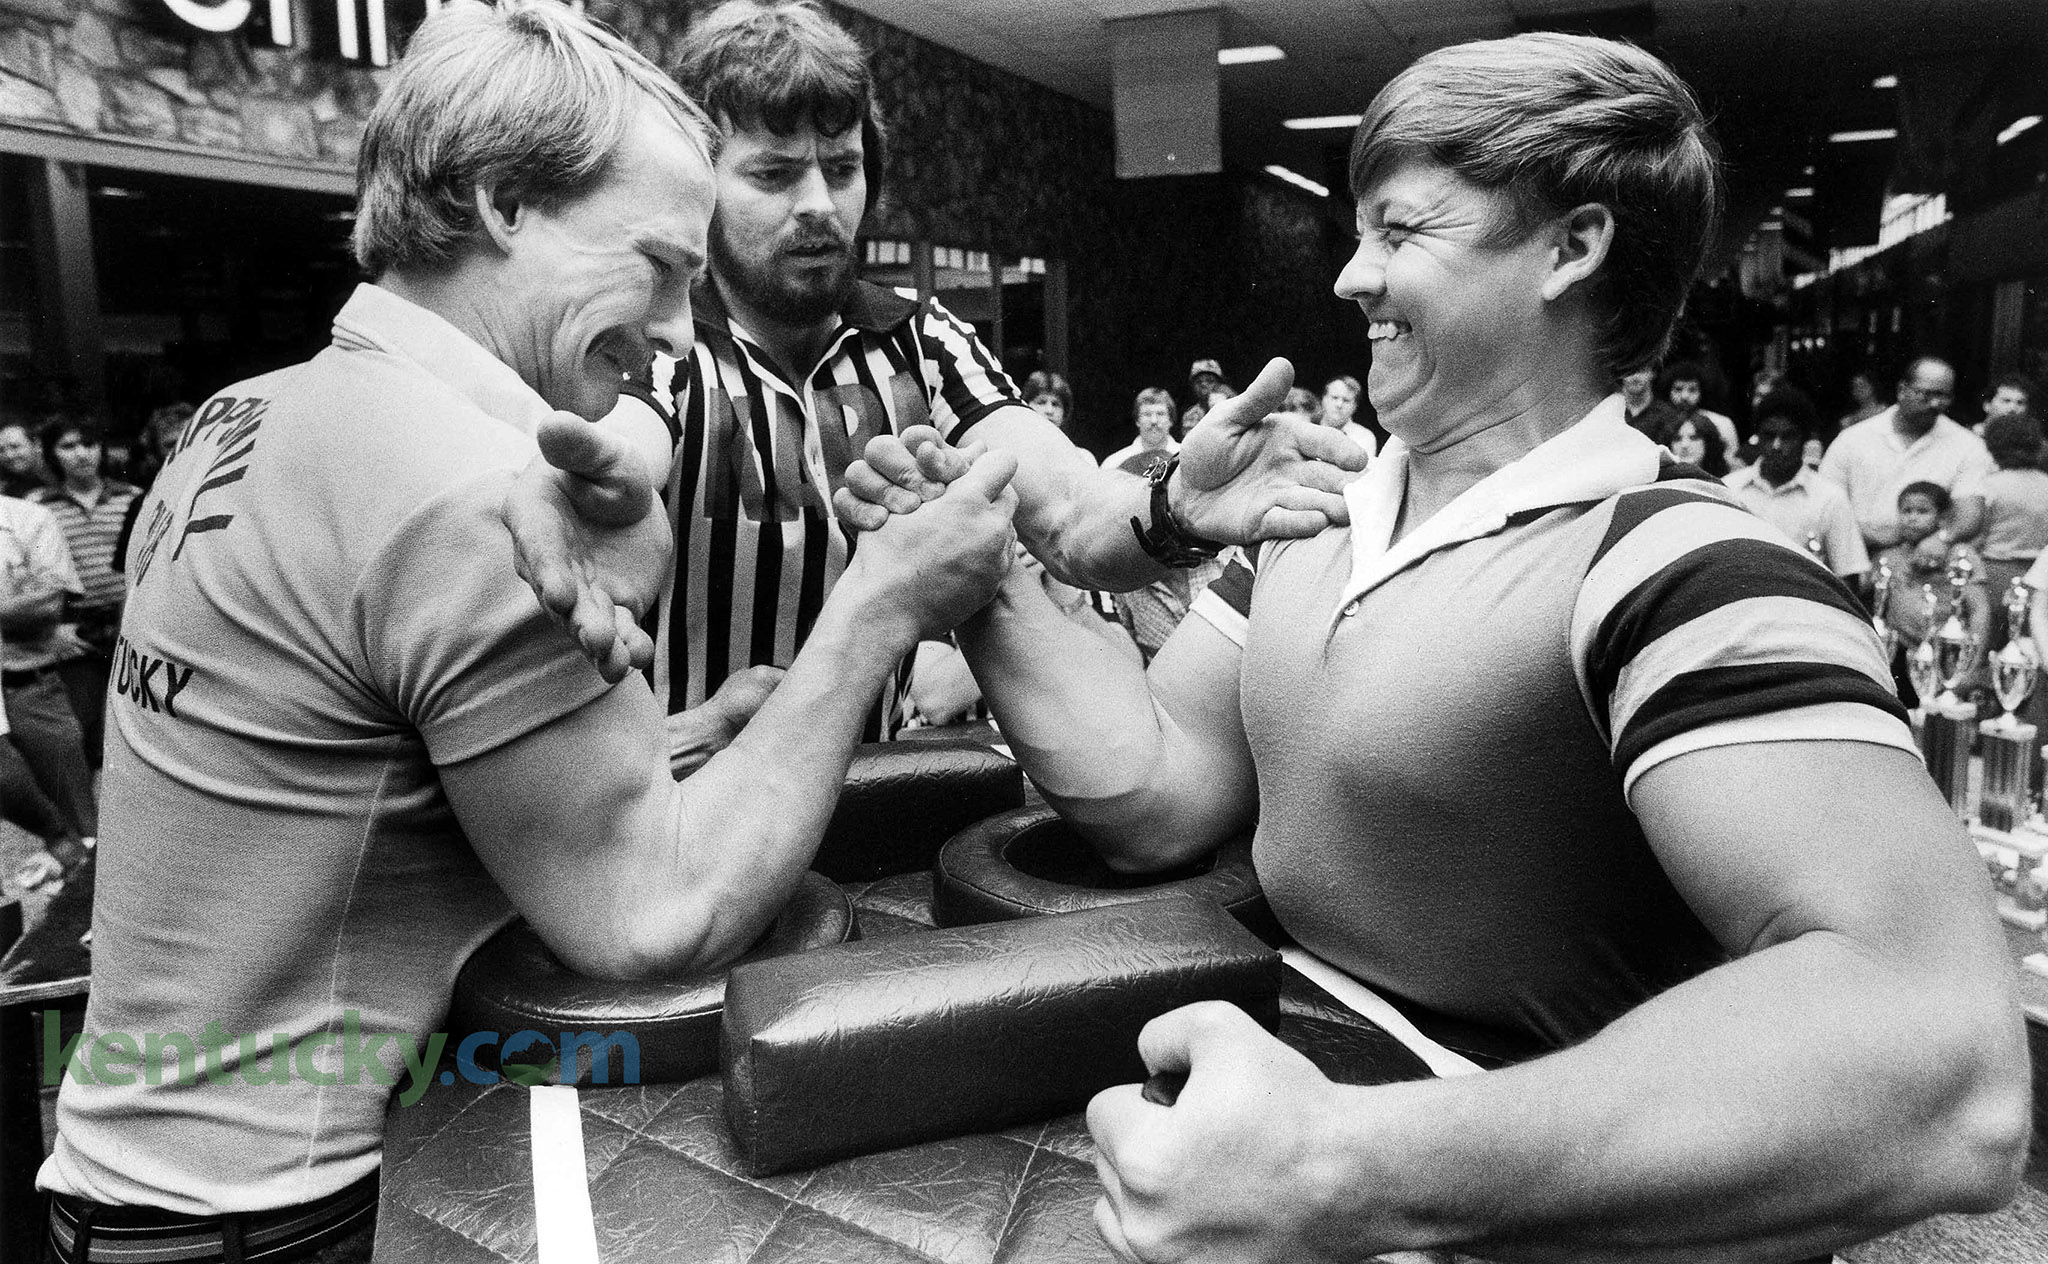 Arm-wrestling at Turfland Mall, 1980 | Kentucky Photo Archive